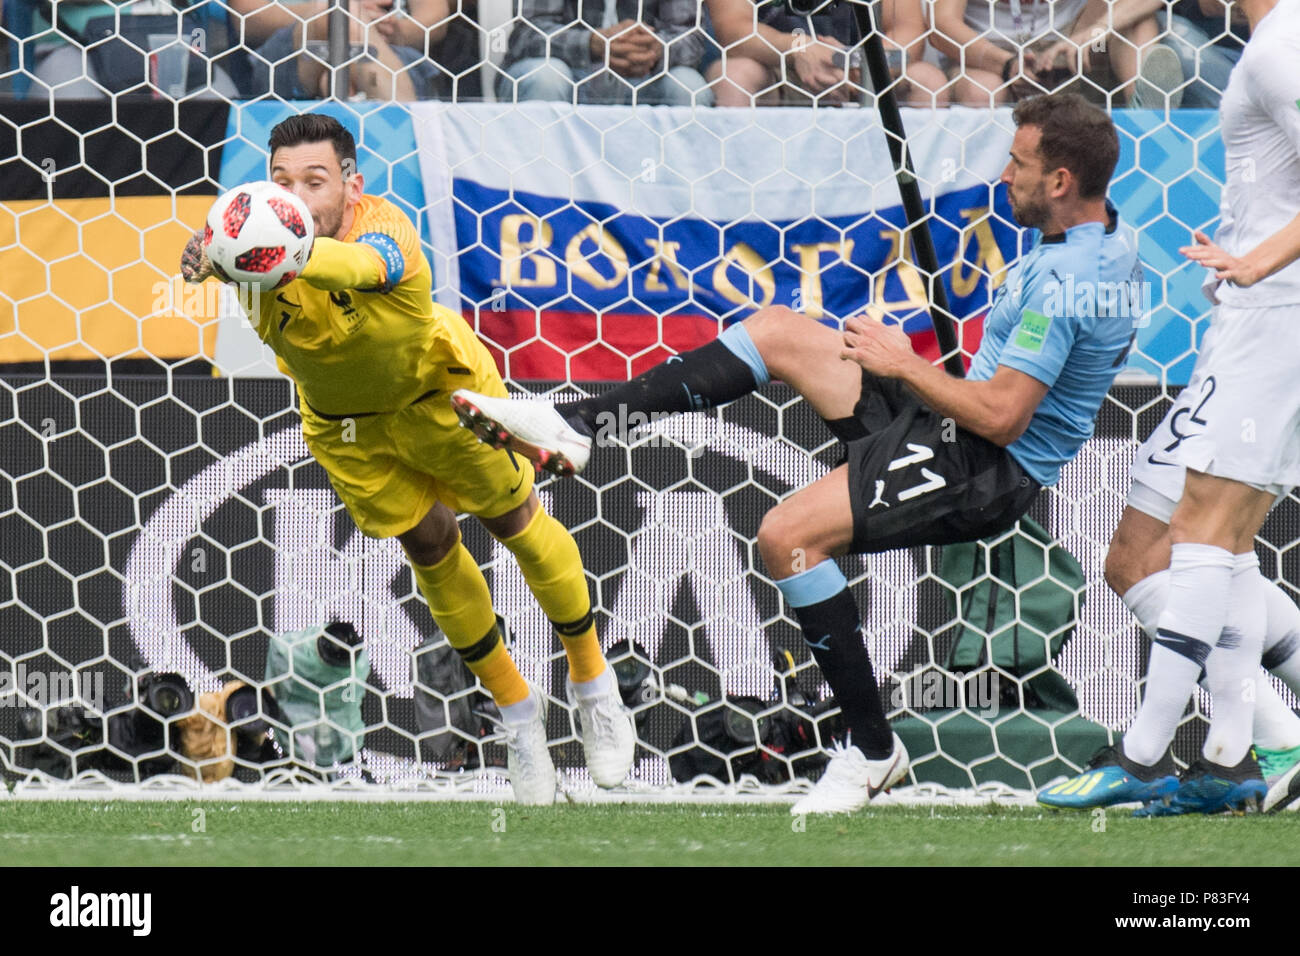 goalkeeper Hugo LLORIS (left, FRA) is on the ball in front of Cristhian STUANI (URU), action, duels, Uruguay (URU) - France (FRA) 0: 2, quarter-finals, game 57, on 06.07.2018 in Nizhny Novgorod; Football World Cup 2018 in Russia from 14.06. - 15.07.2018. | usage worldwide Stock Photo